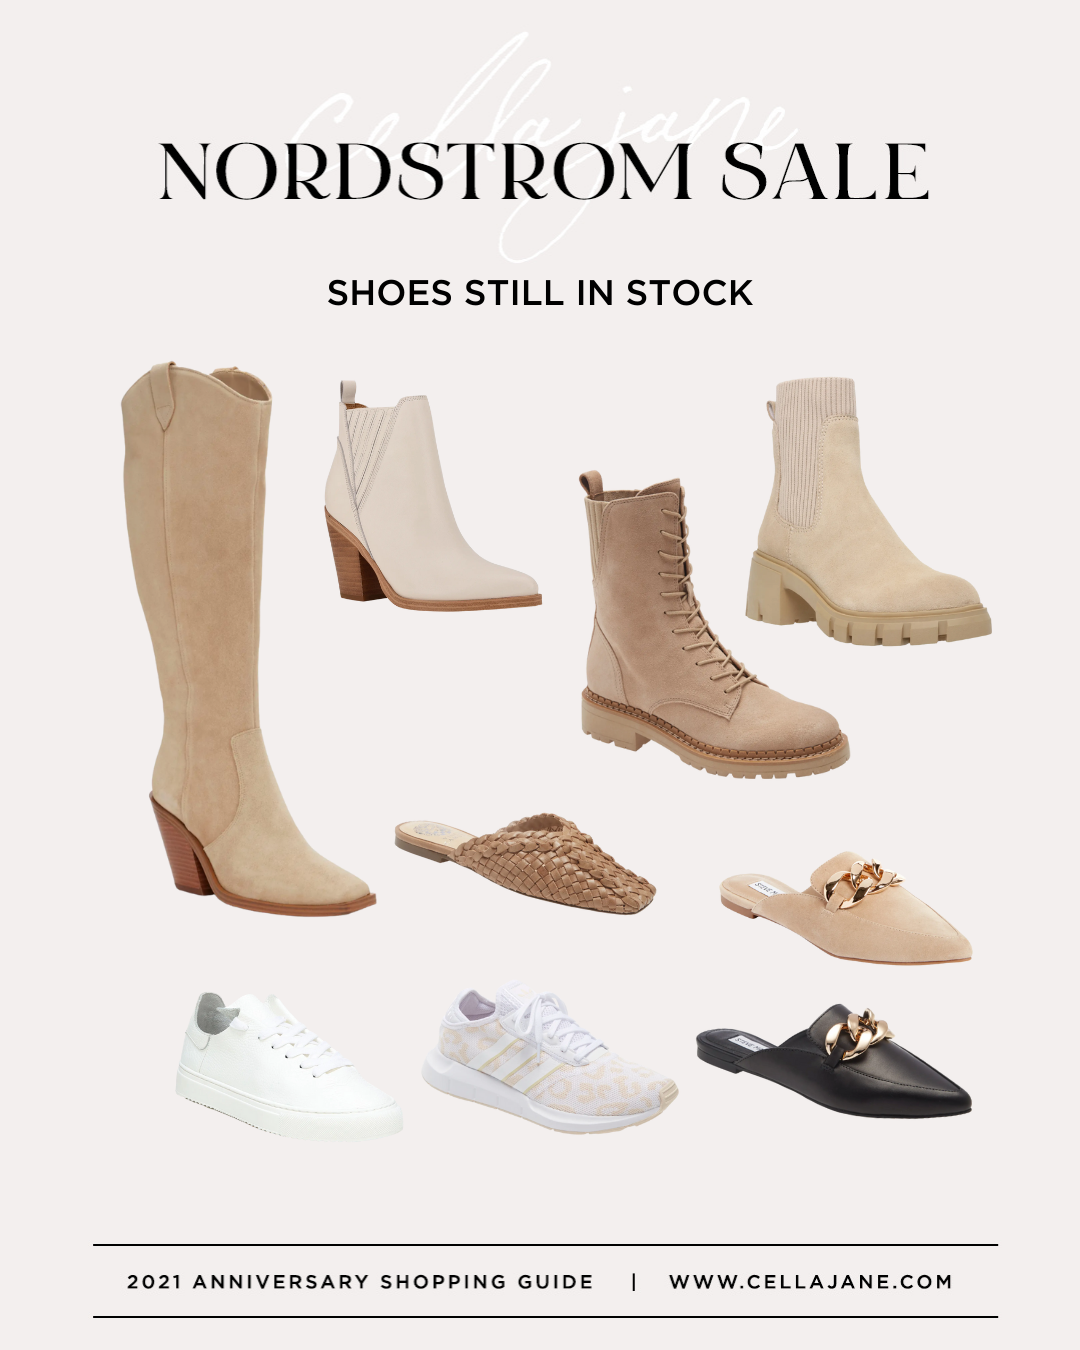 Top 15 Items to Buy from the #Nsale still in stock